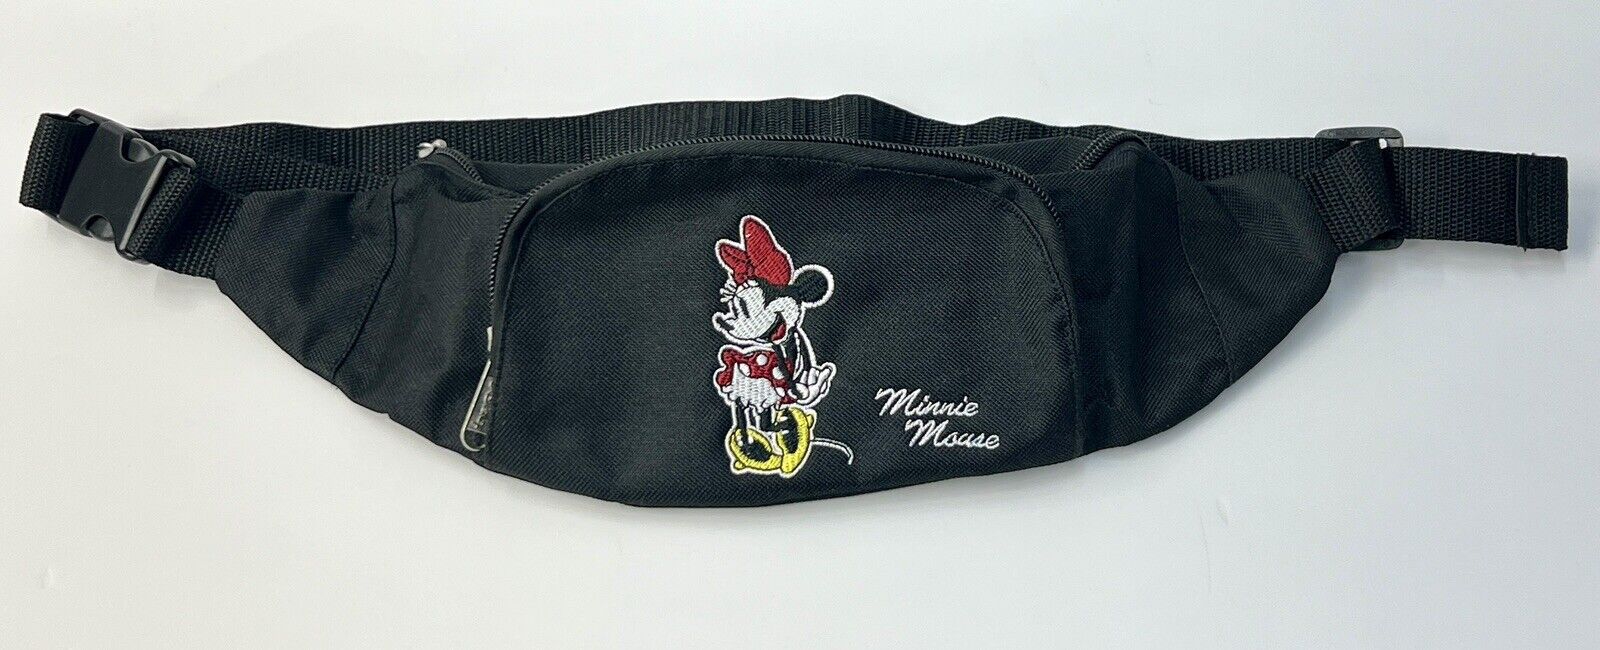 Disney Minnie Mouse Fanny Pack Black Adjustable Buckle Waist Strap Embroidered 